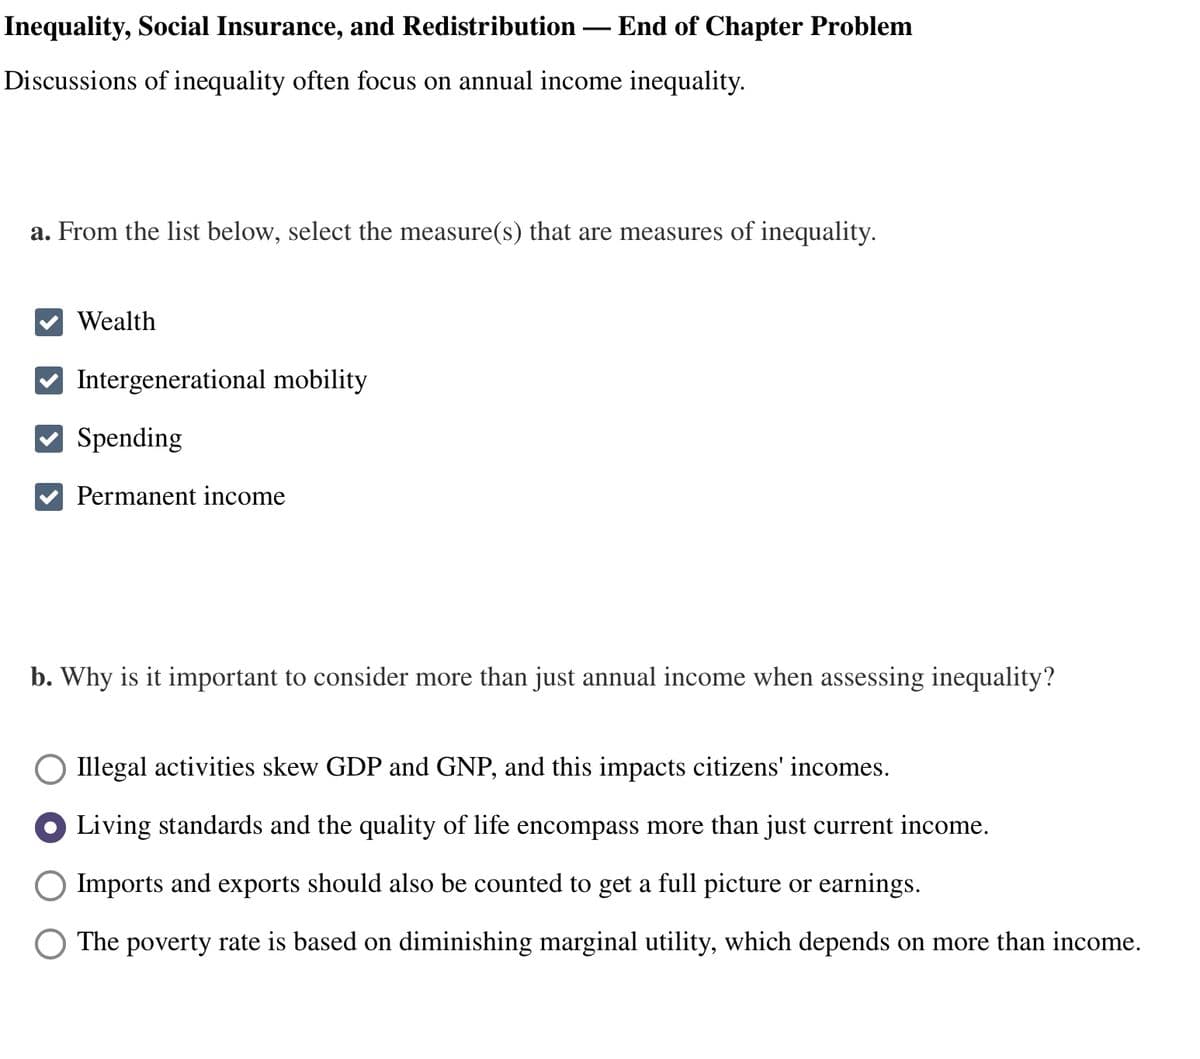 Inequality, Social Insurance, and Redistribution End of Chapter Problem
Discussions of inequality often focus on annual income inequality.
a. From the list below, select the measure(s) that are measures of inequality.
Wealth
✔Intergenerational mobility
Spending
Permanent income
b. Why is it important to consider more than just annual income when assessing inequality?
Illegal activities skew GDP and GNP, and this impacts citizens' incomes.
Living standards and the quality of life encompass more than just current income.
Imports and exports should also be counted to get a full picture or earnings.
The poverty rate is based on diminishing marginal utility, which depends on more than income.